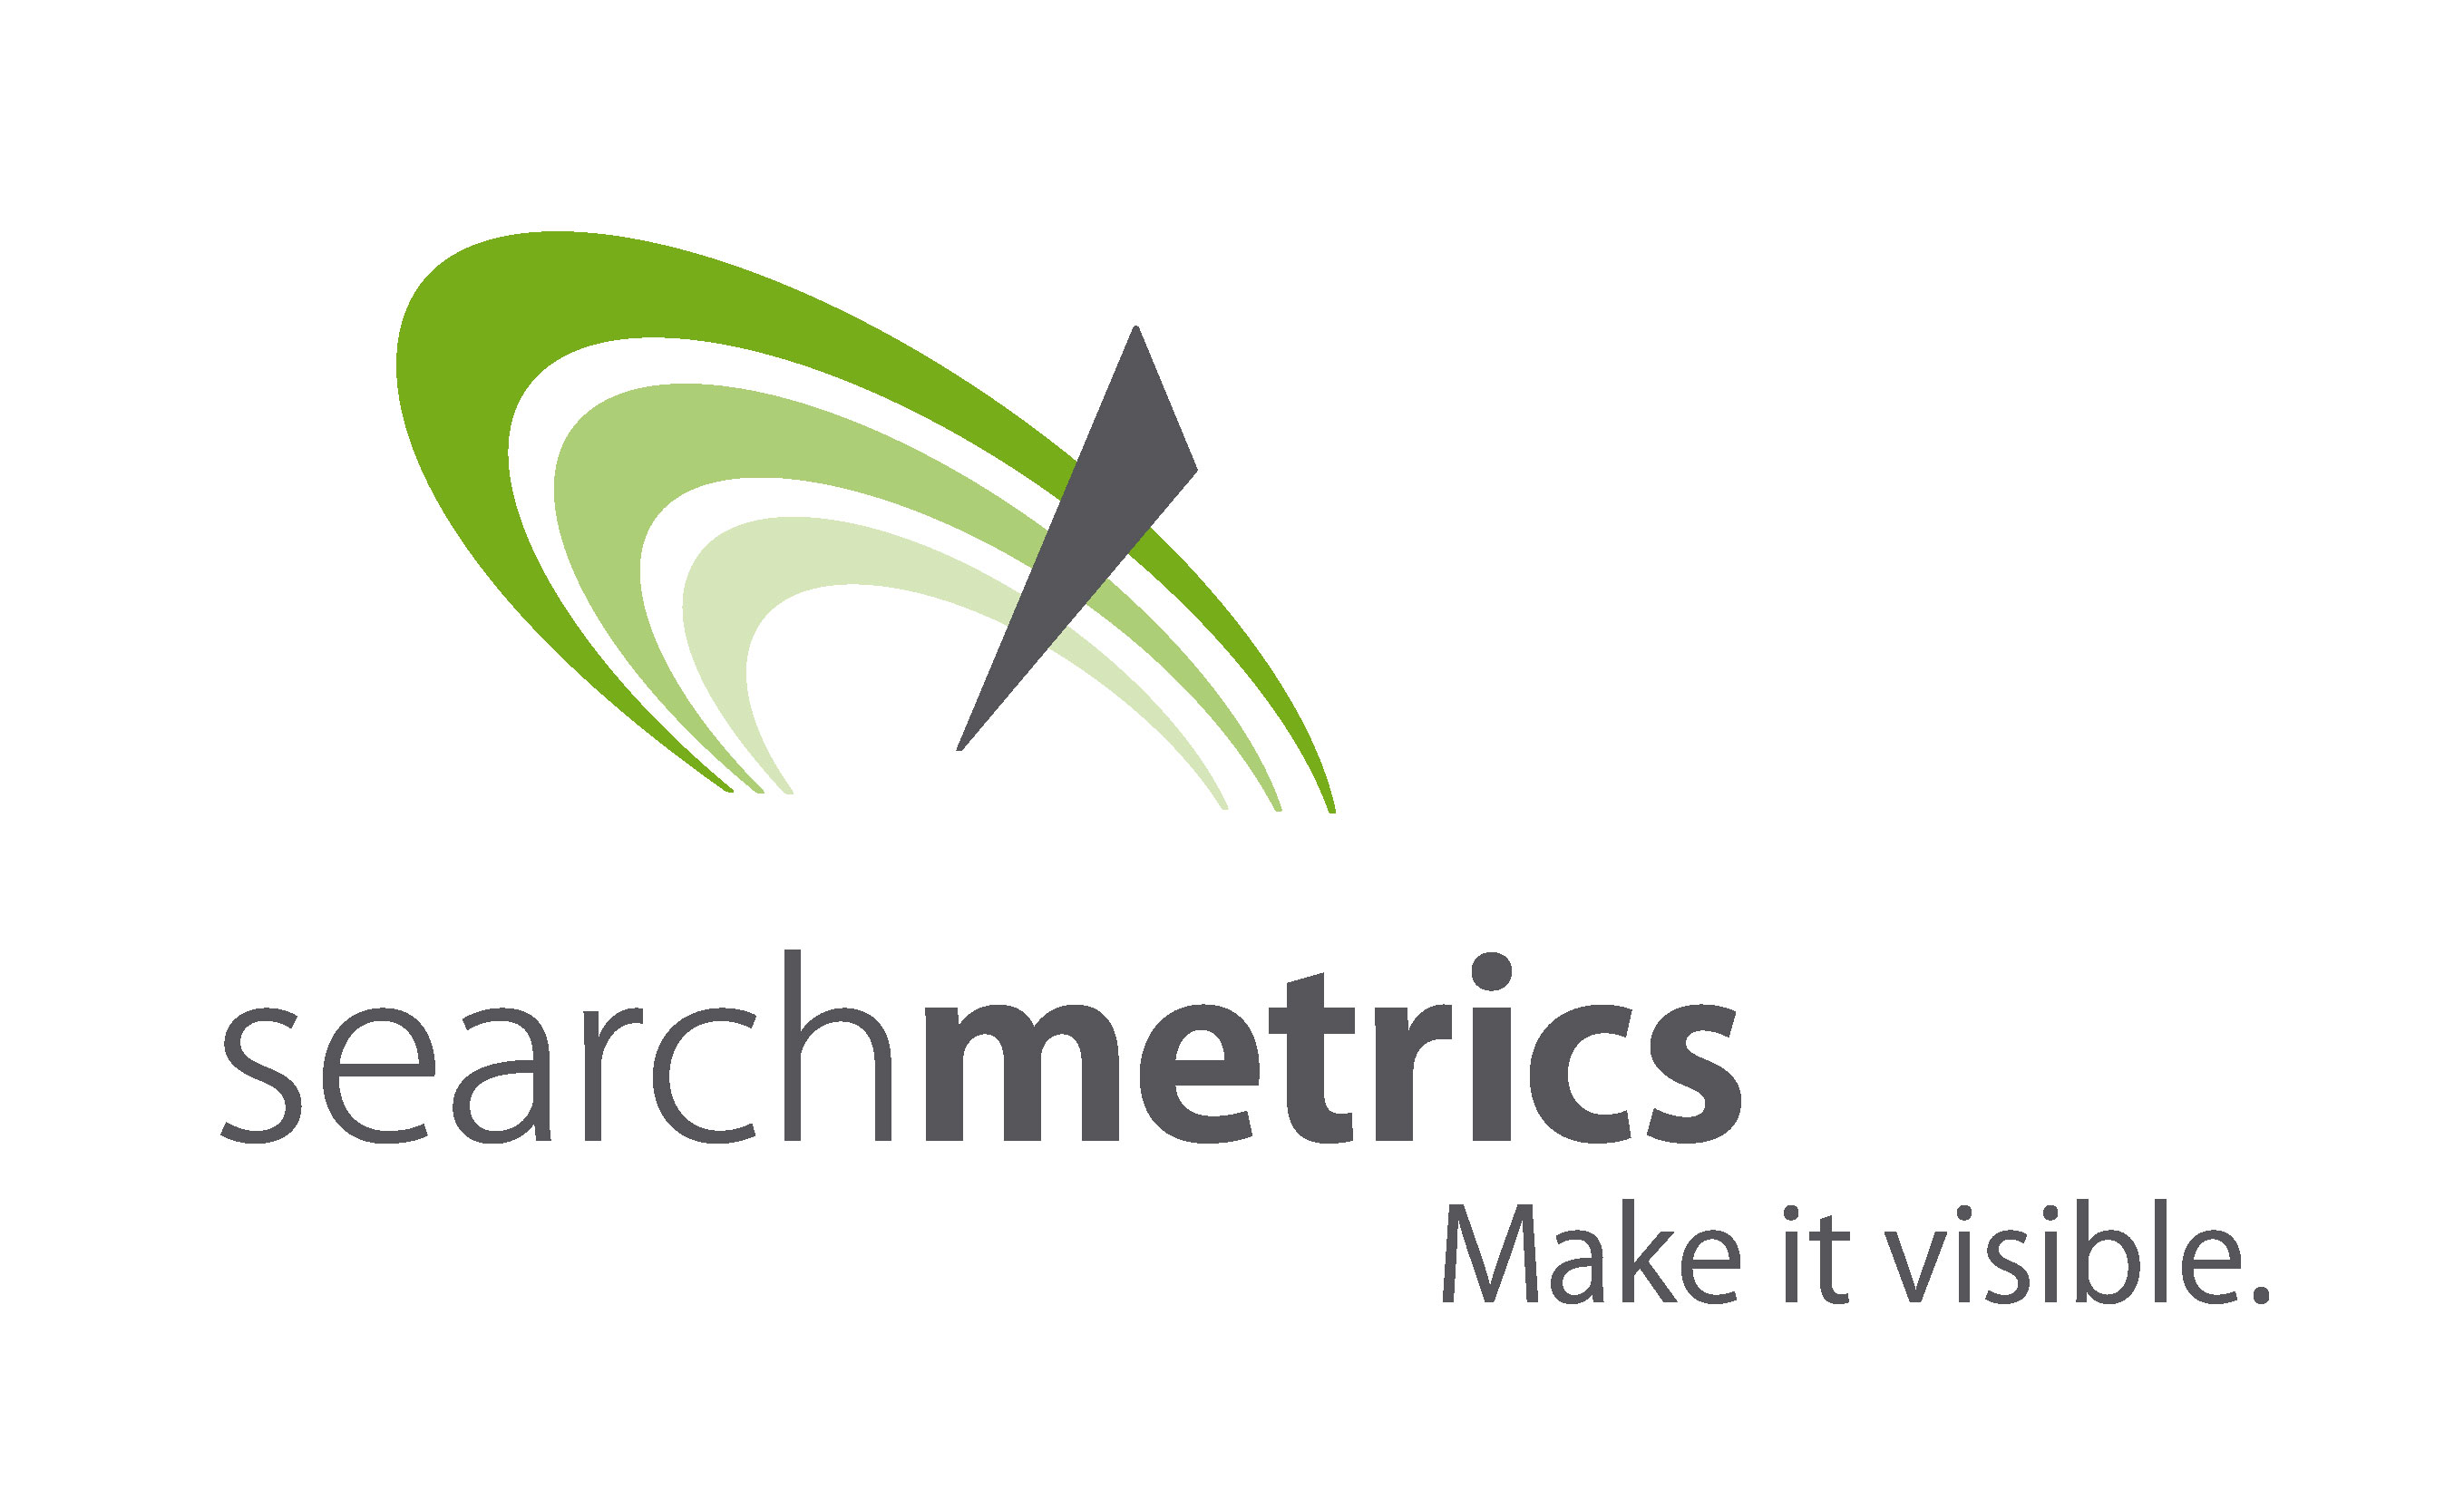 Searchmetrics Identifies The Most Visible Brands In Paid, Organic Search Across Google